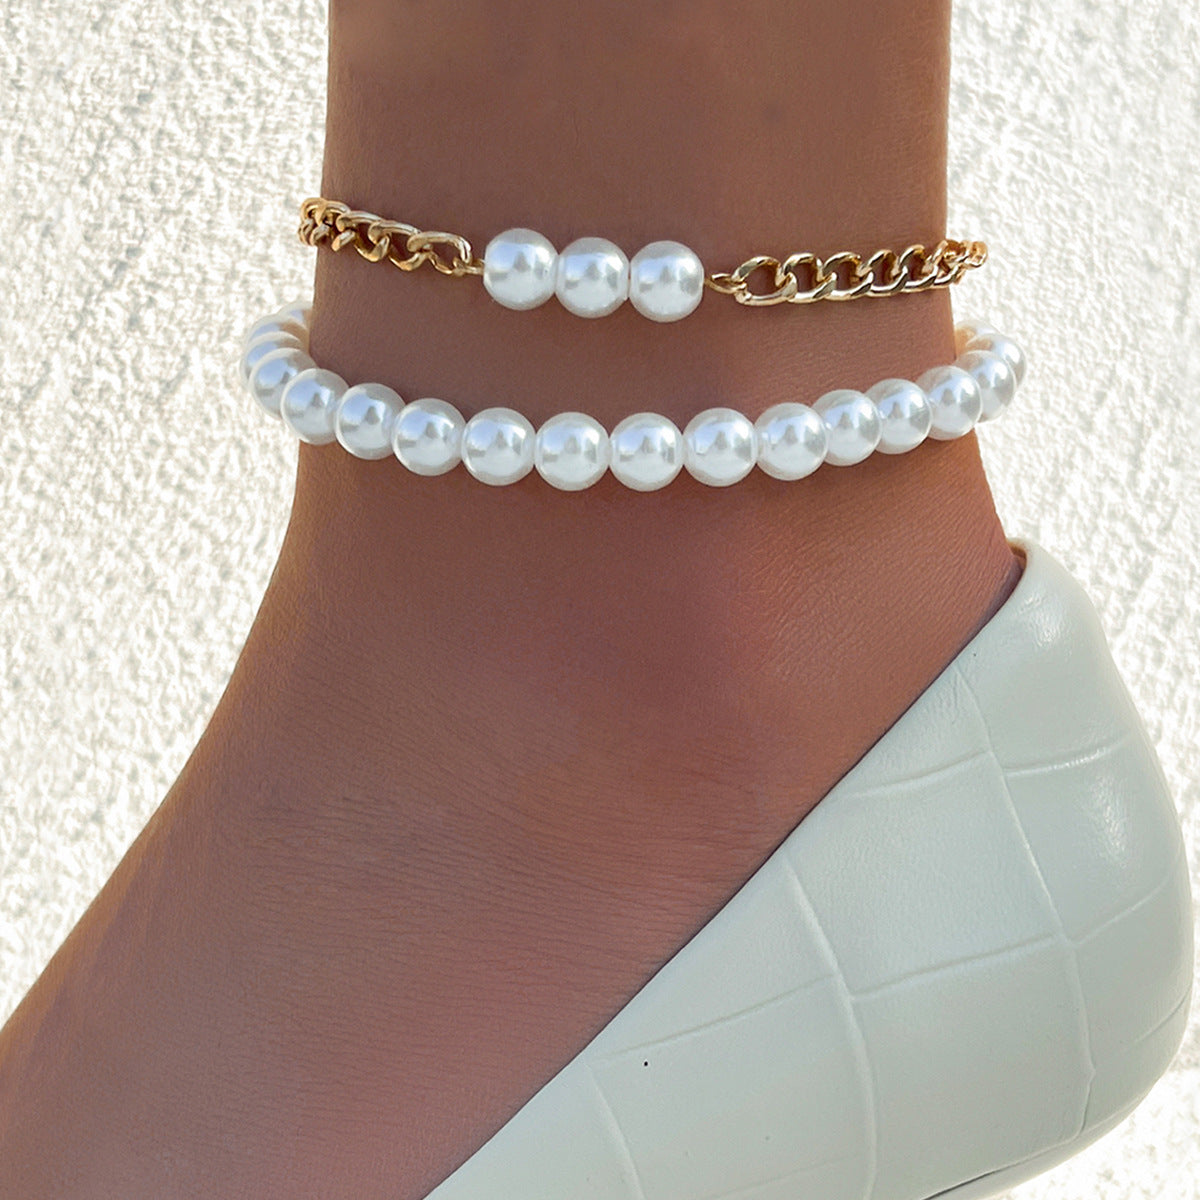 Pearl and chain two-piece anklet